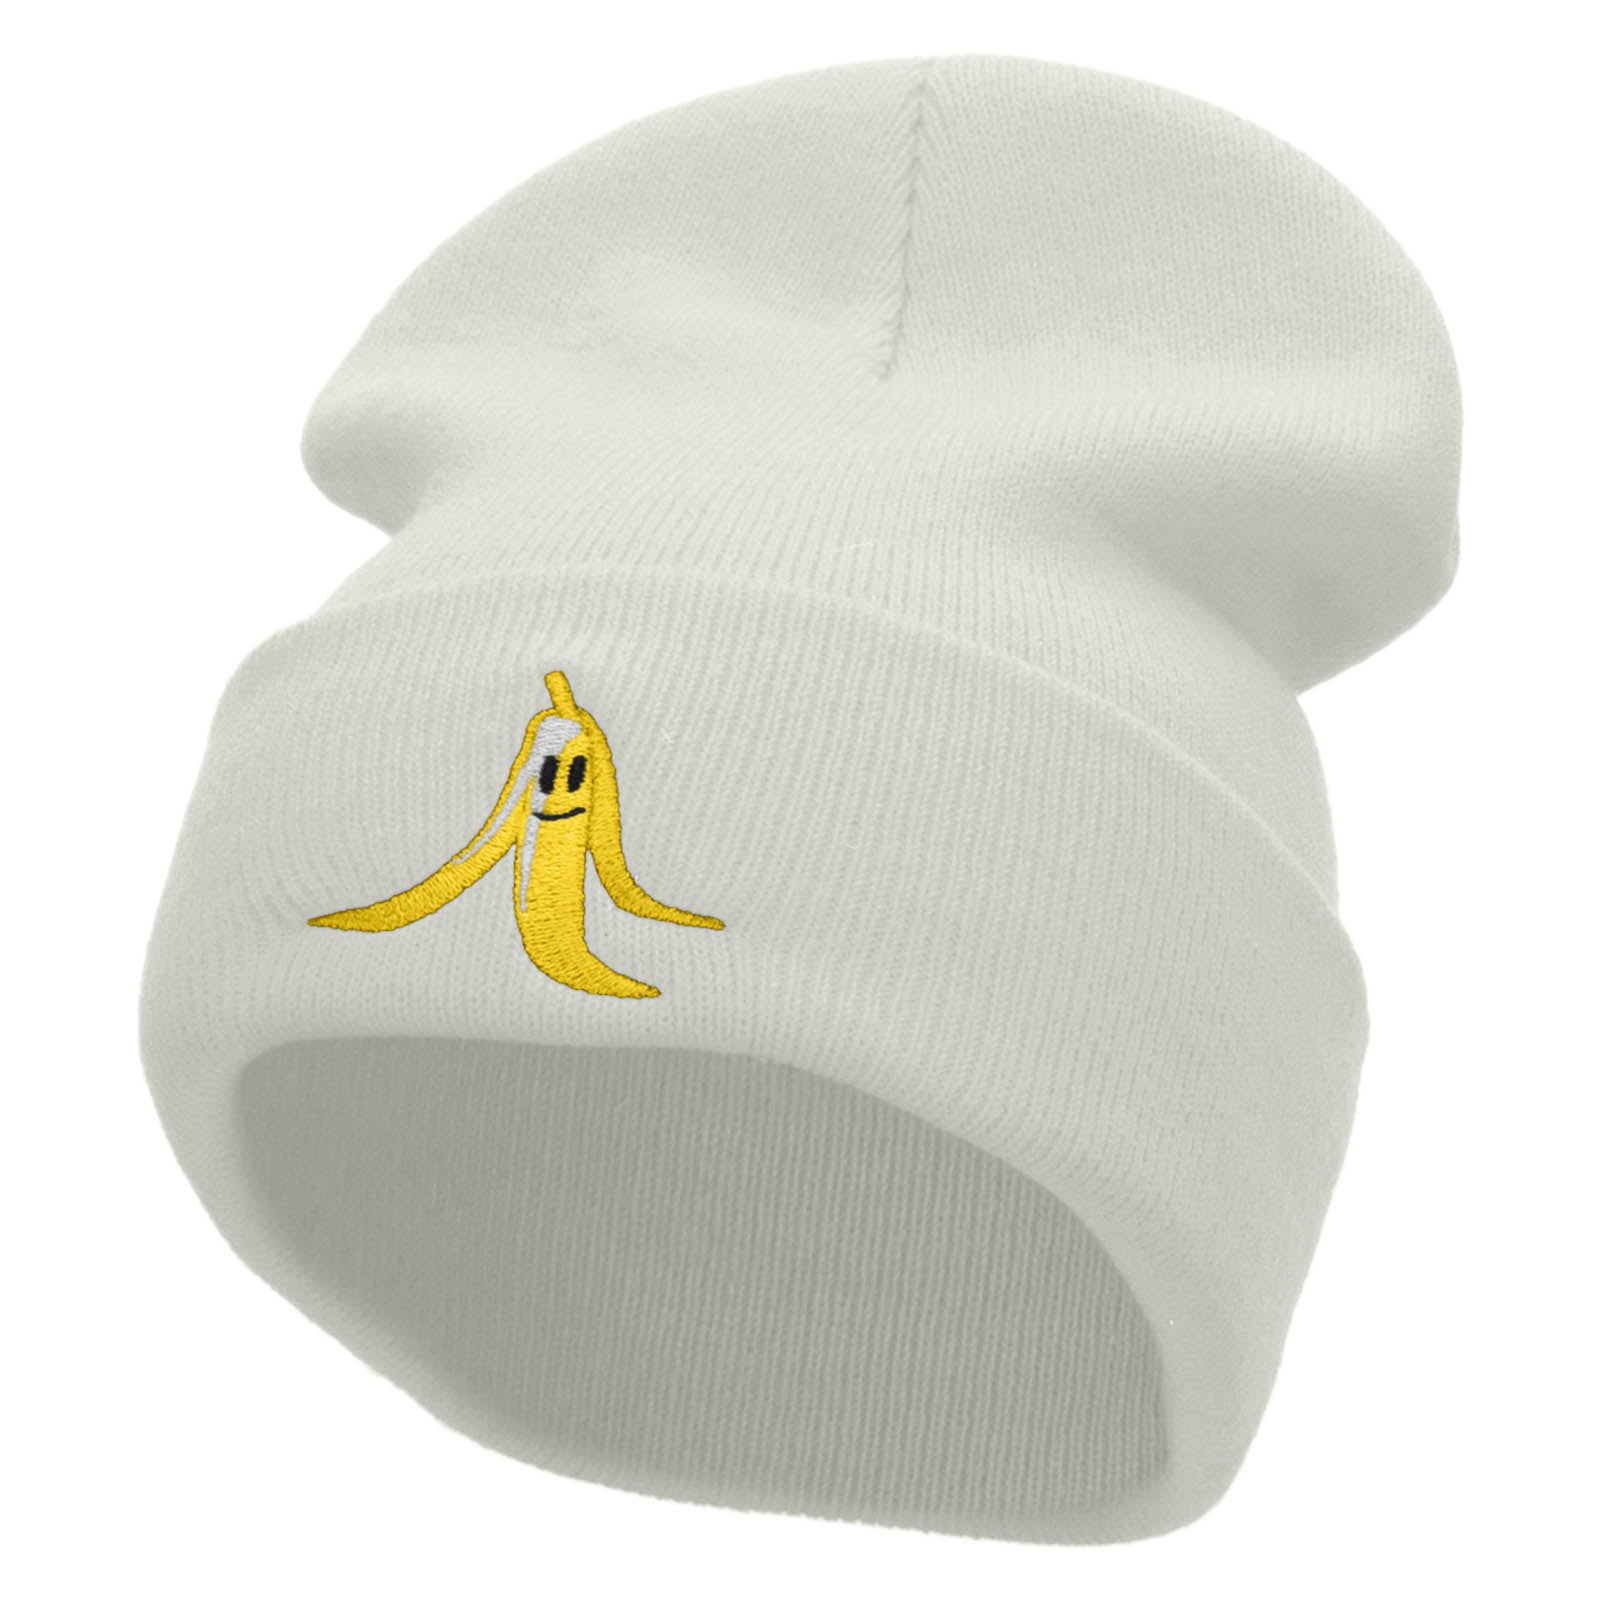 Banana Smile Embroidered 12 Inch Long Knitted Beanie - White OSFM